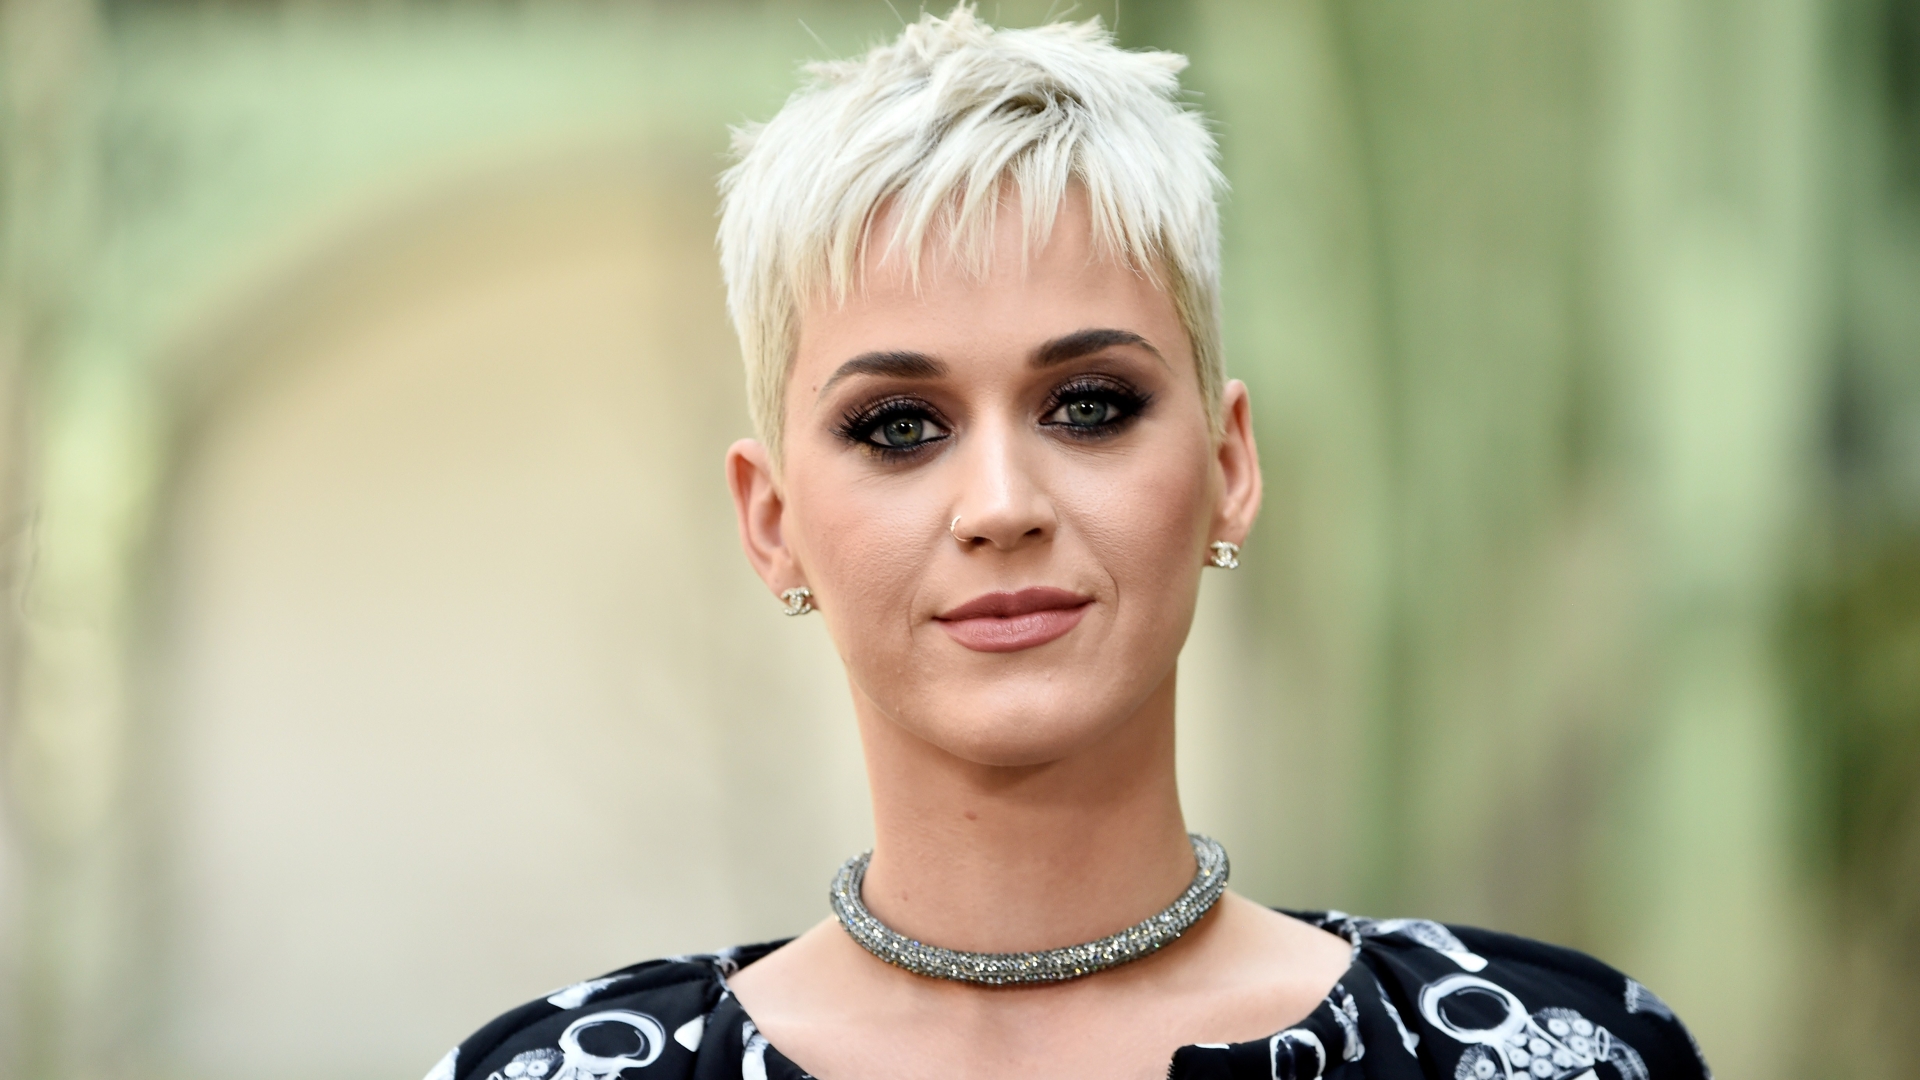 5. Katy Perry's Iconic Blue Hair and Makeup Tutorial - wide 7